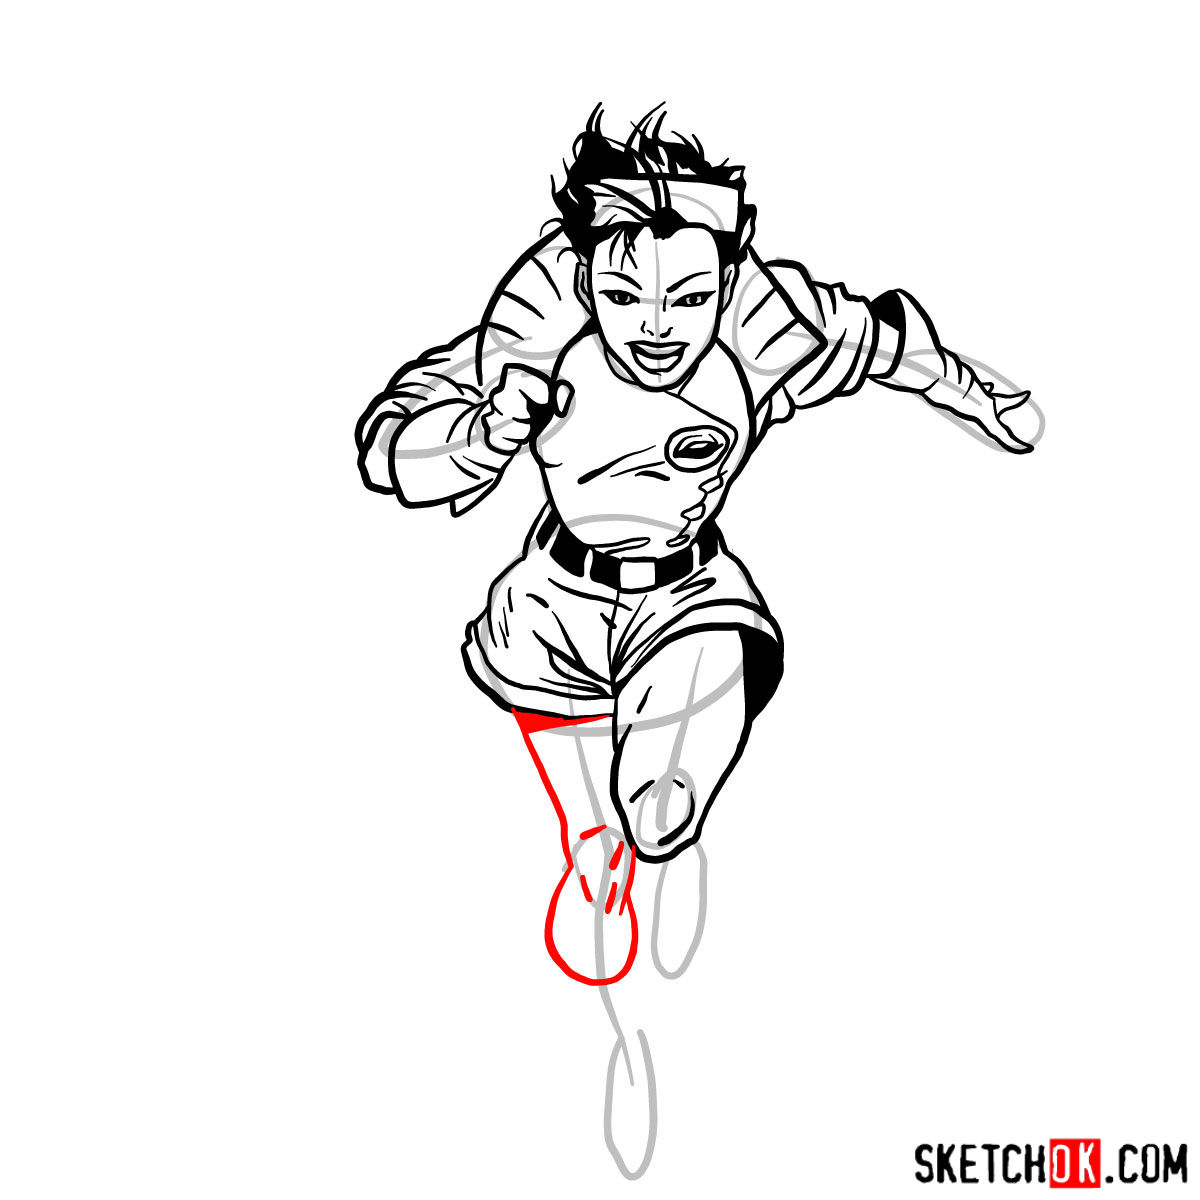 How to draw Jubilee mutant from X-Men series - step 12